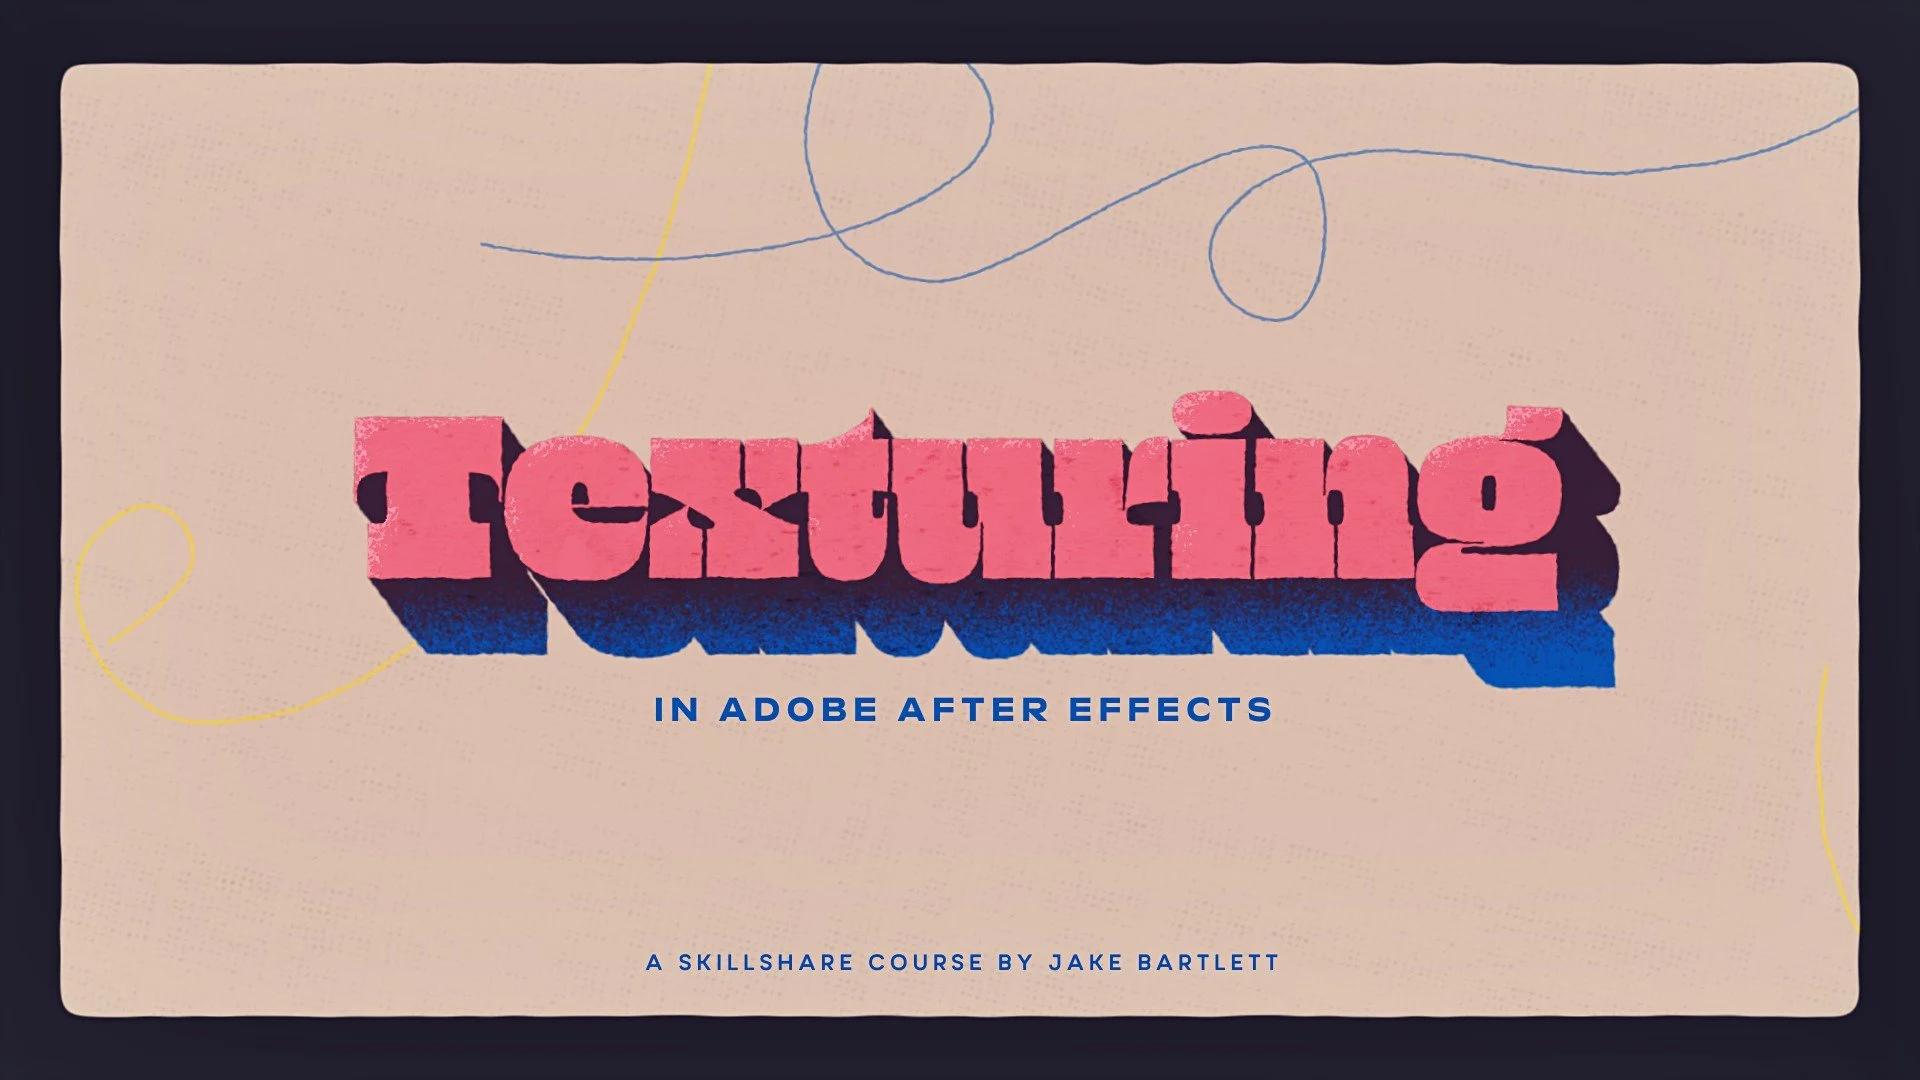 Texturing in Adobe After Effects